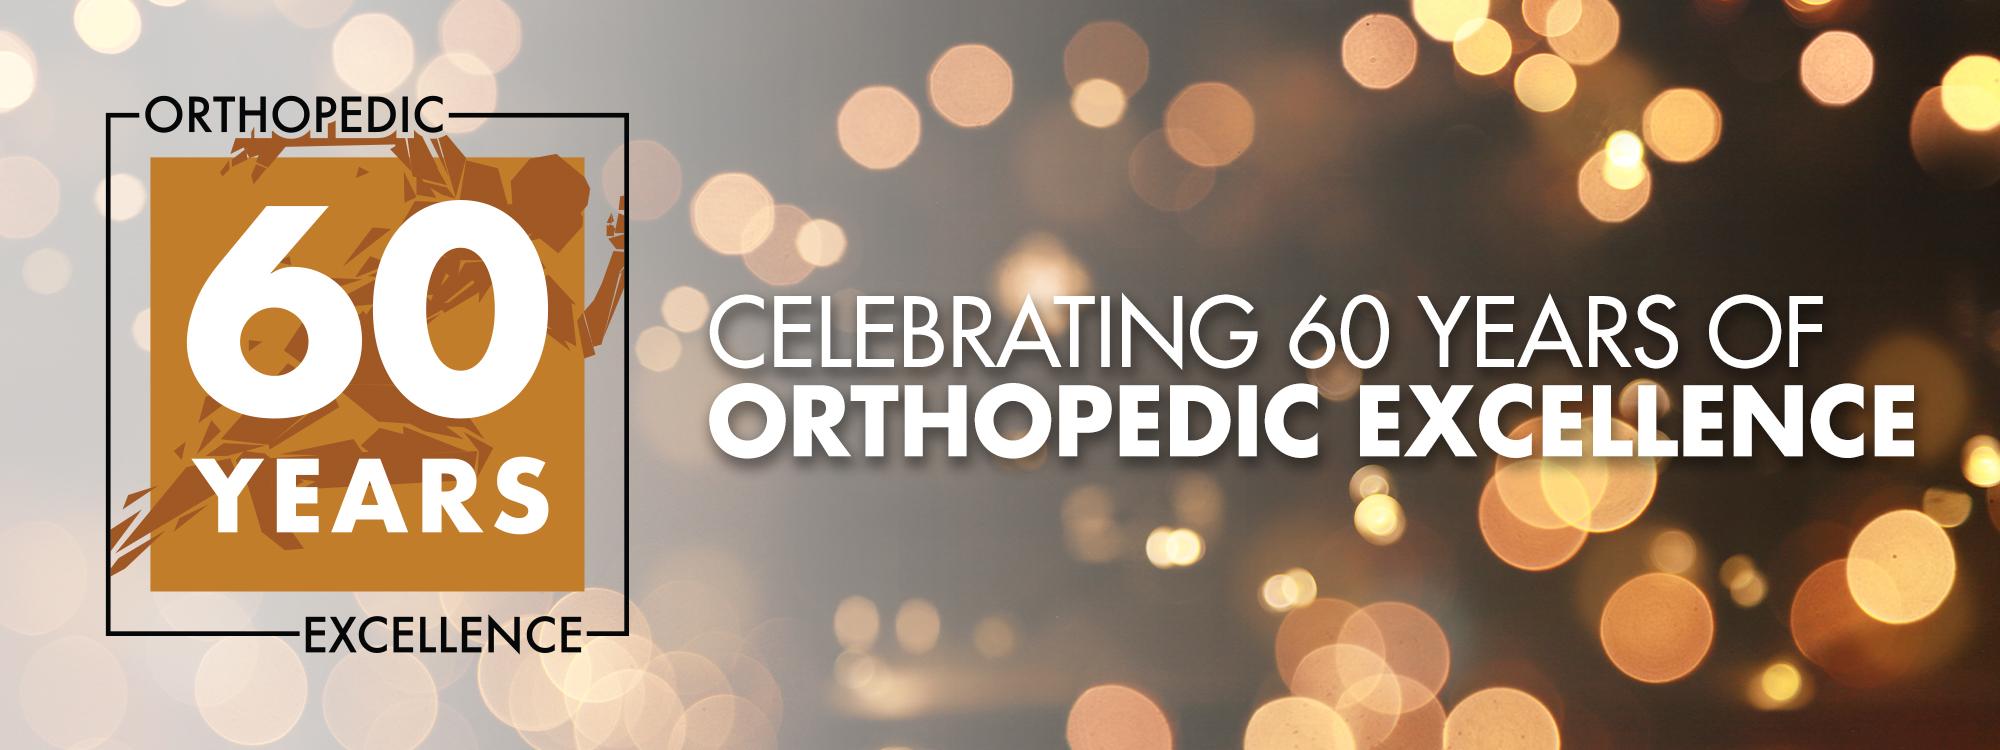 Celebrating 60 Years of Orthopedic Excellence